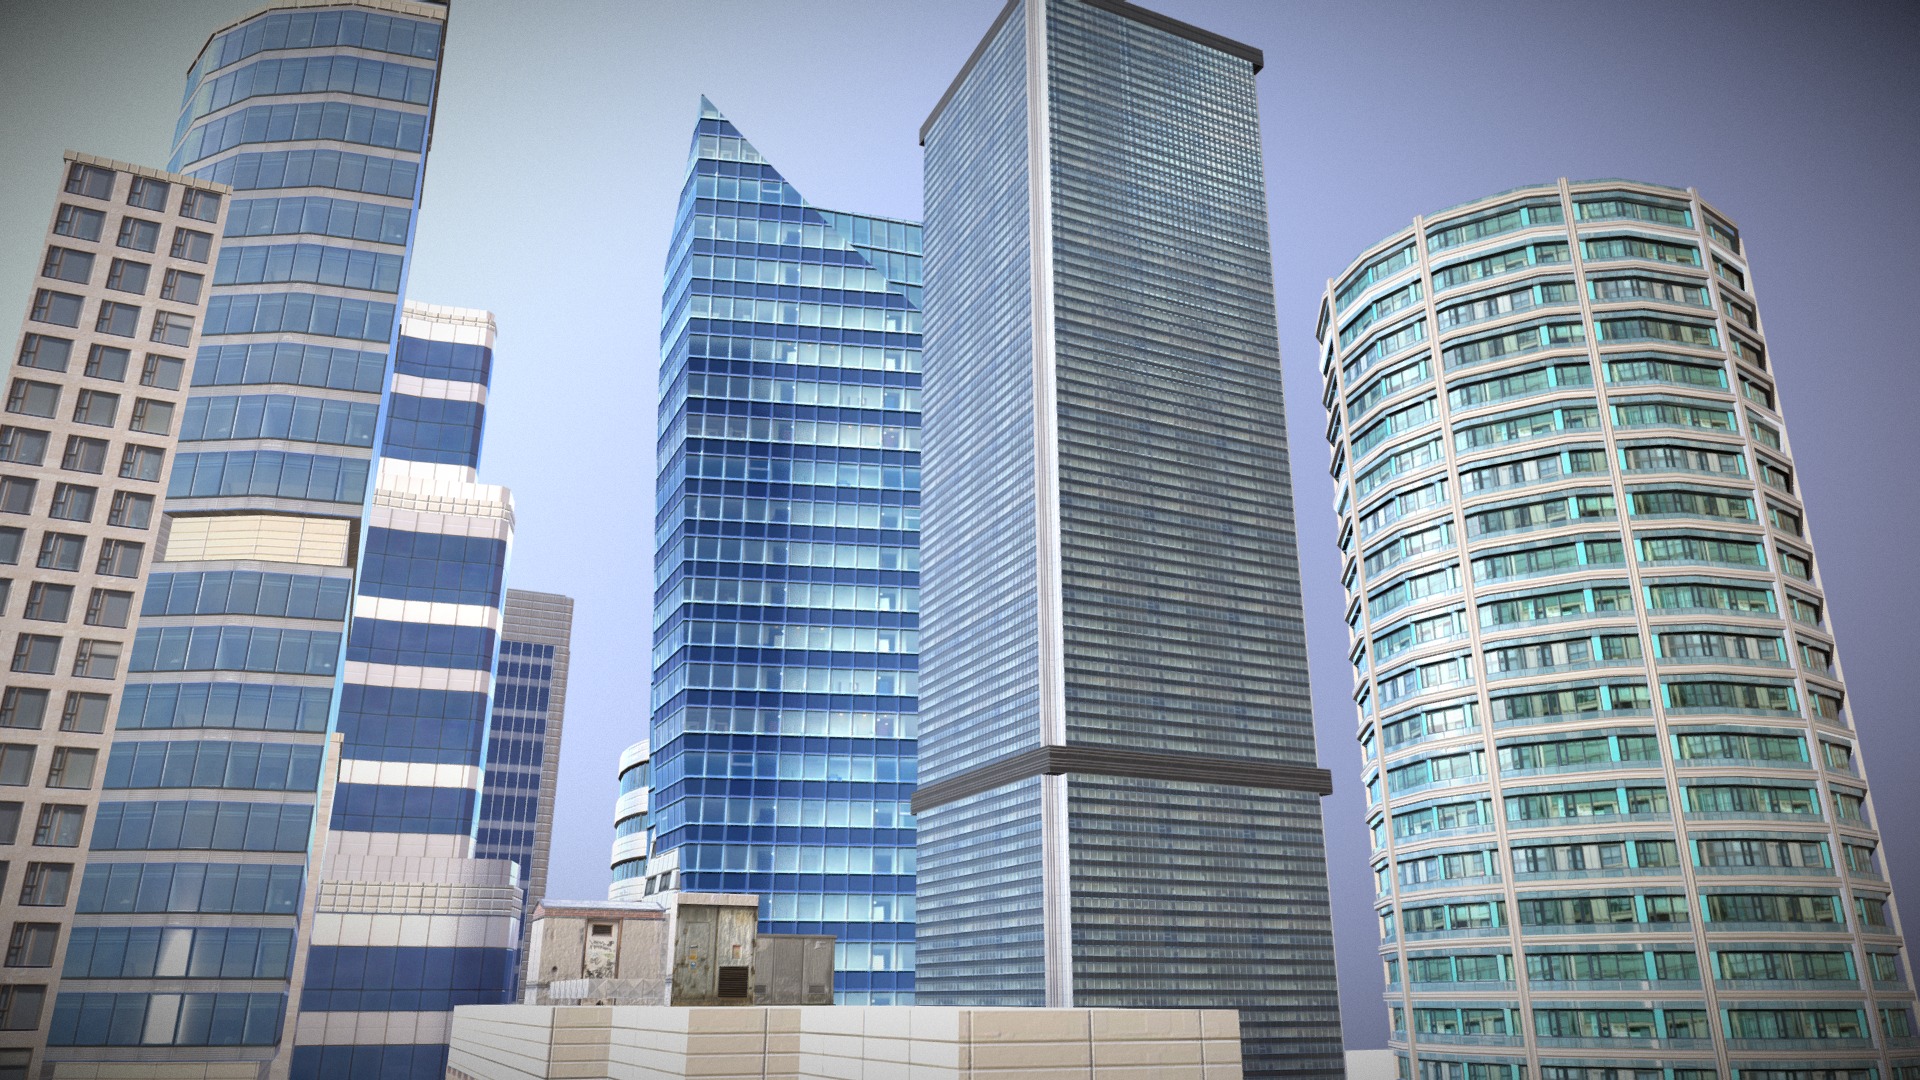 3D model Skyscrapers - This is a 3D model of the Skyscrapers. The 3D model is about a group of tall buildings.